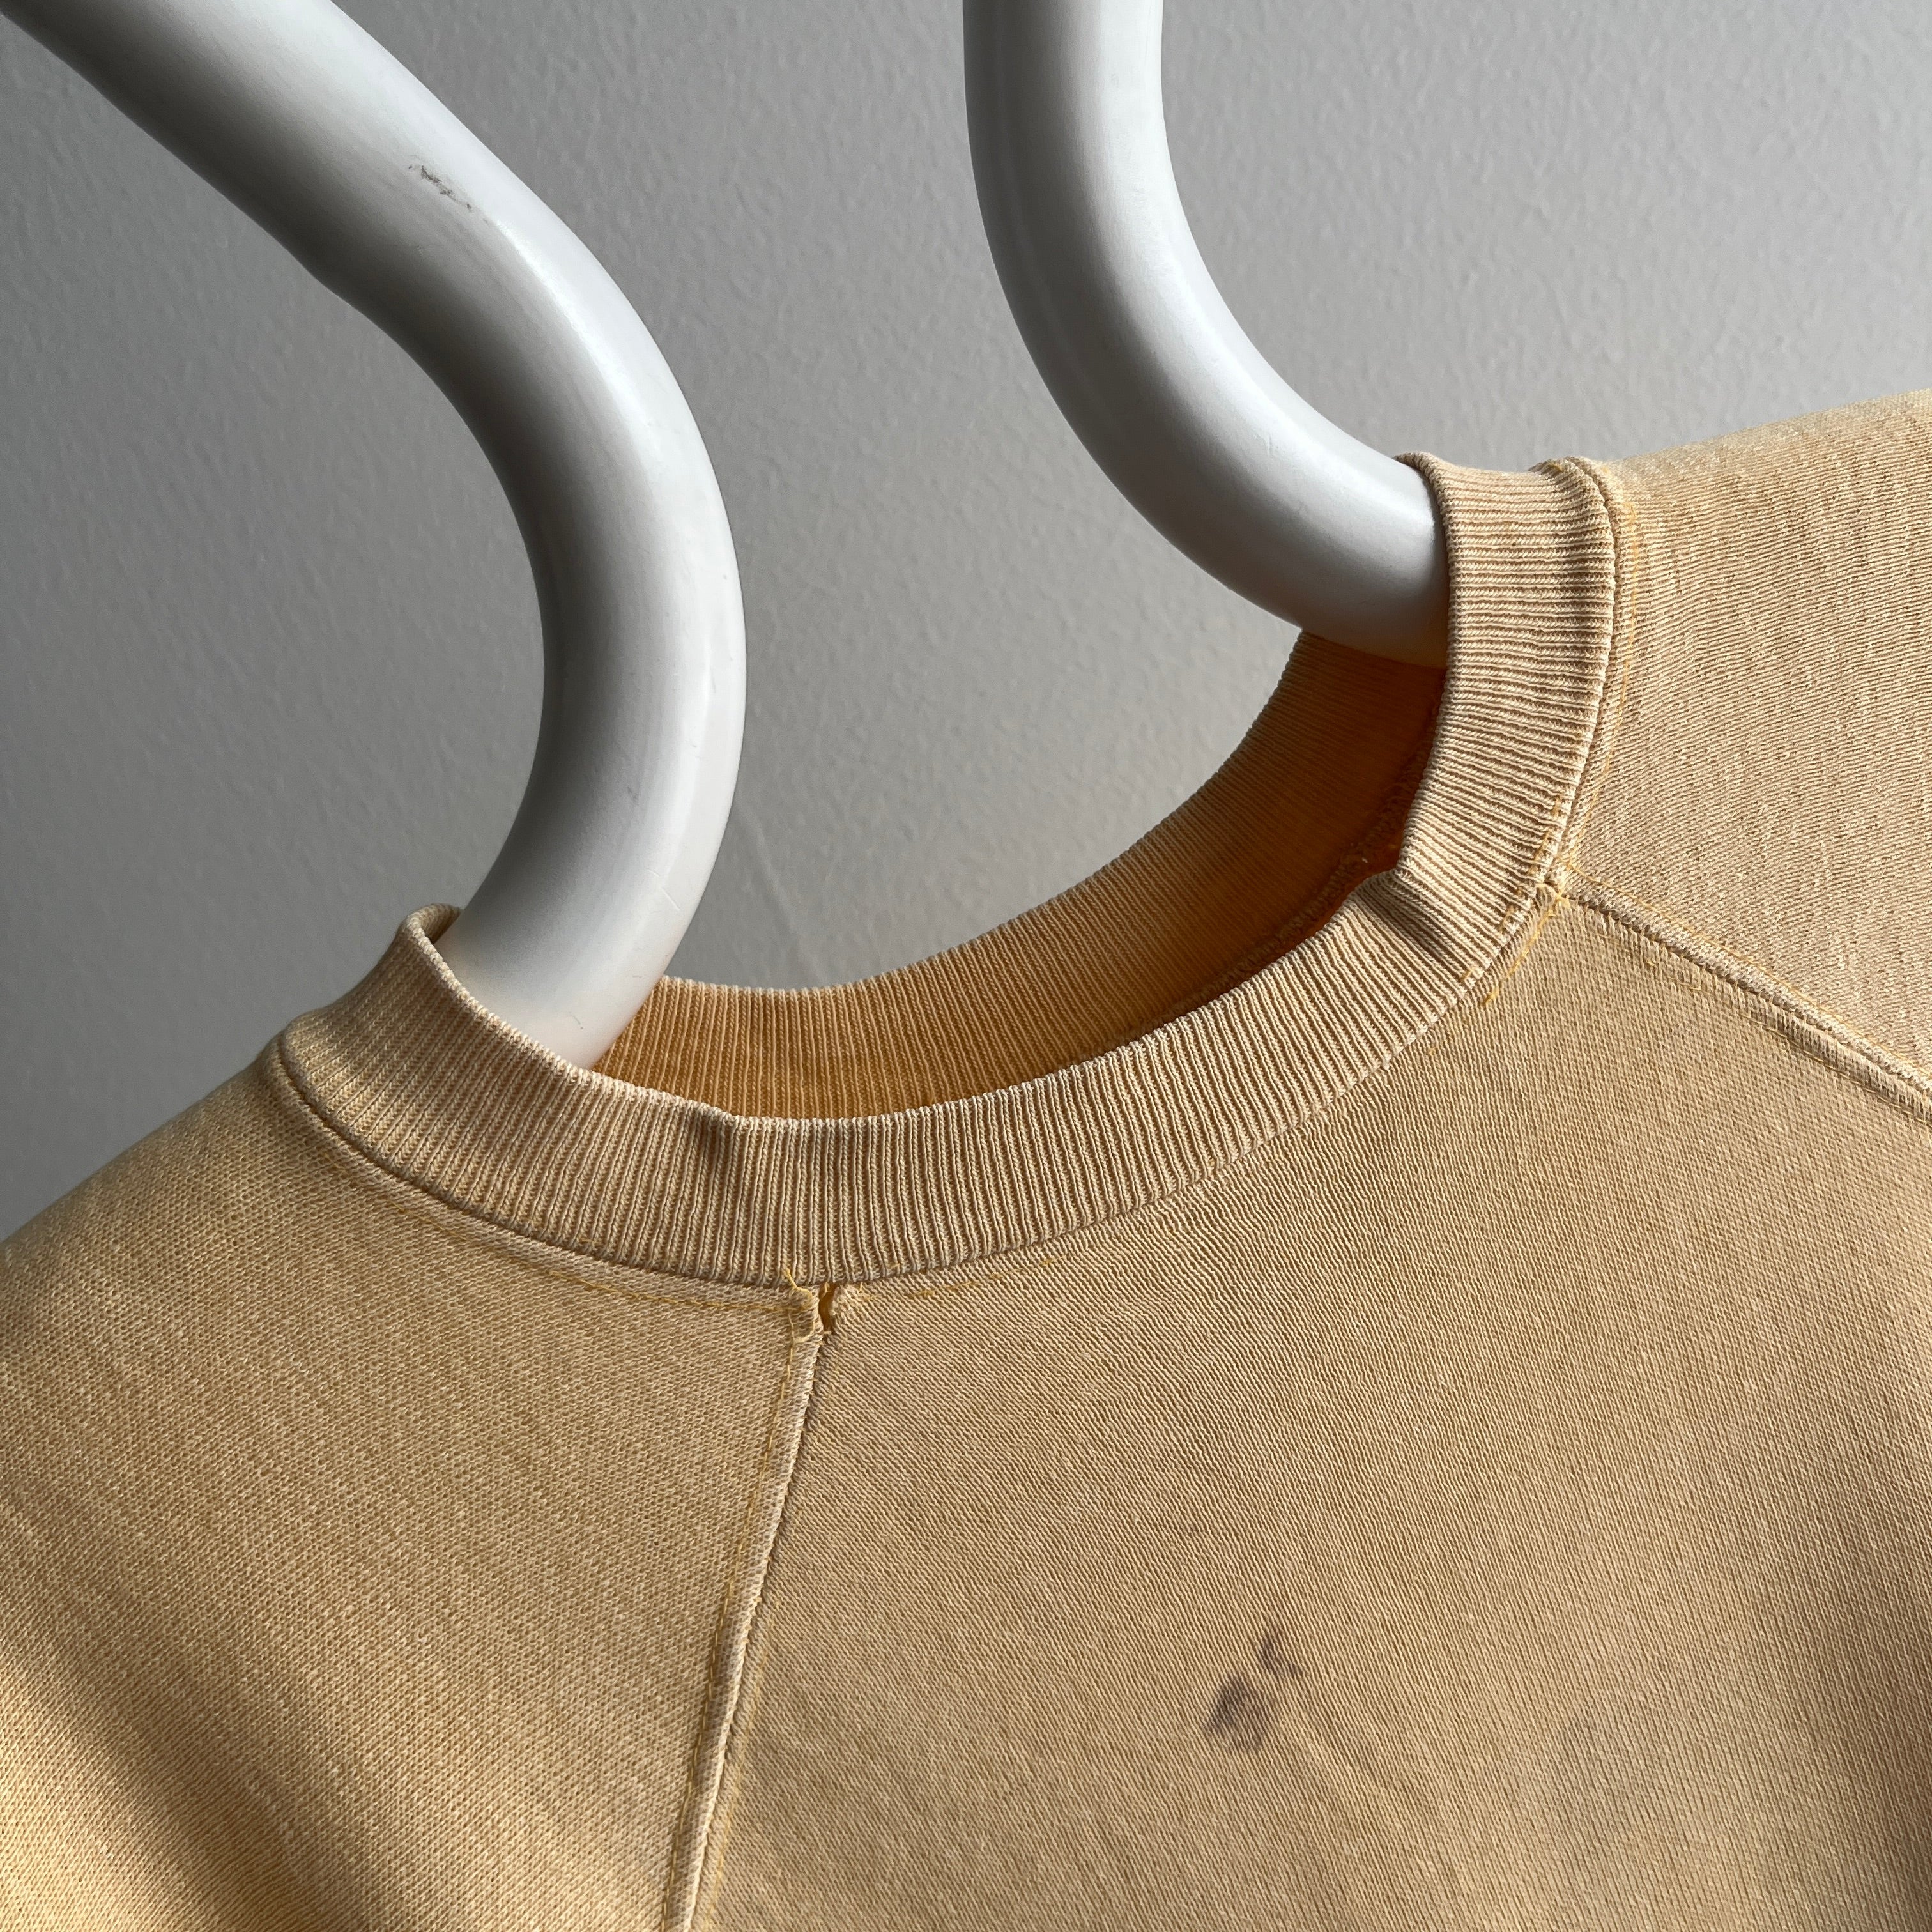 1970s Manila Folder Colored Super Stained in The Best Most Dreamy Sort of Way Soft and Worn Warm Up